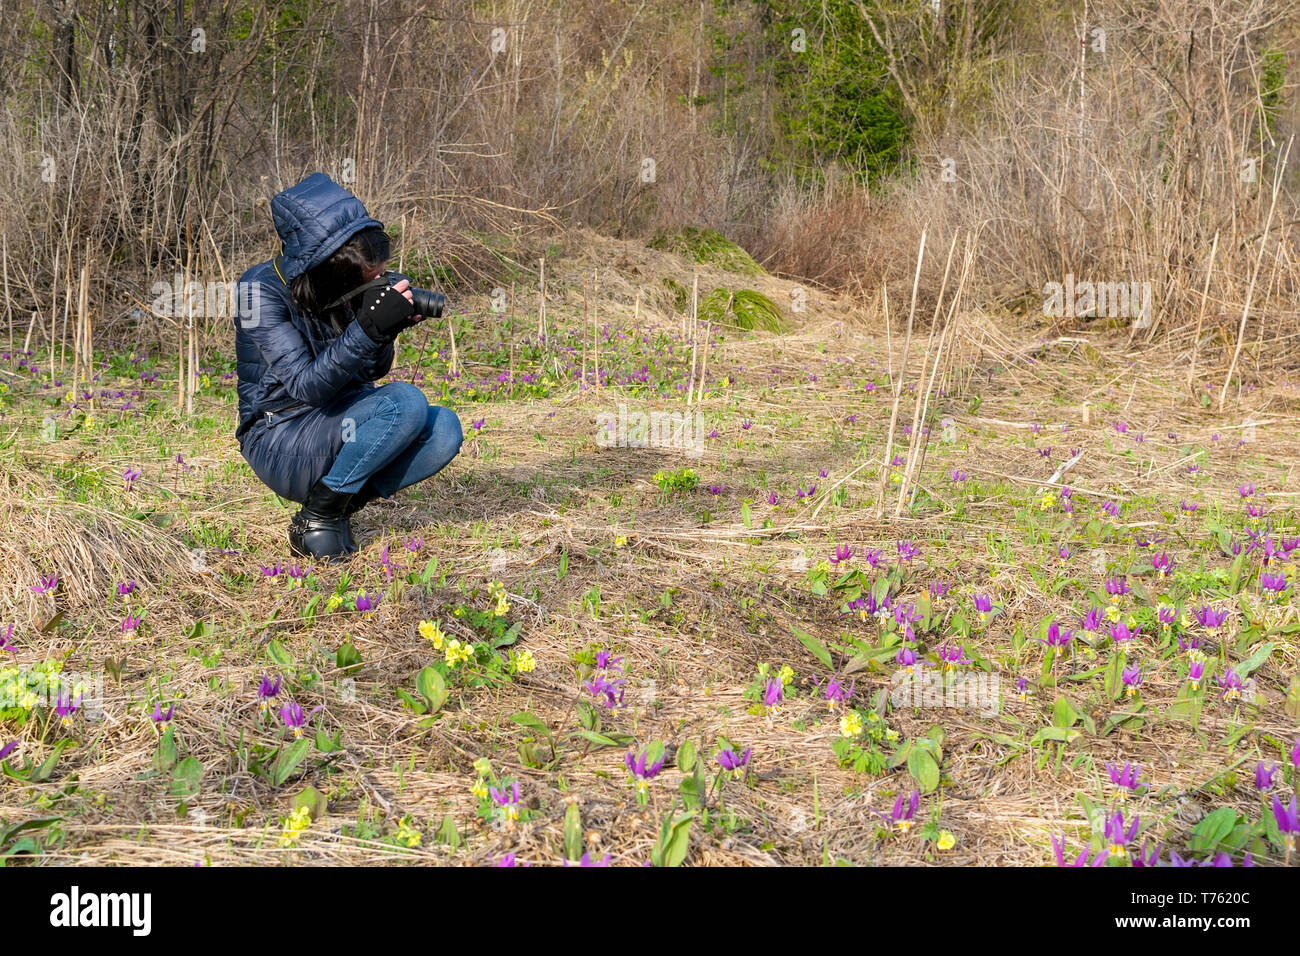 A girl in a warm jacket in nature taking pictures of flowers in a clearing Stock Photo